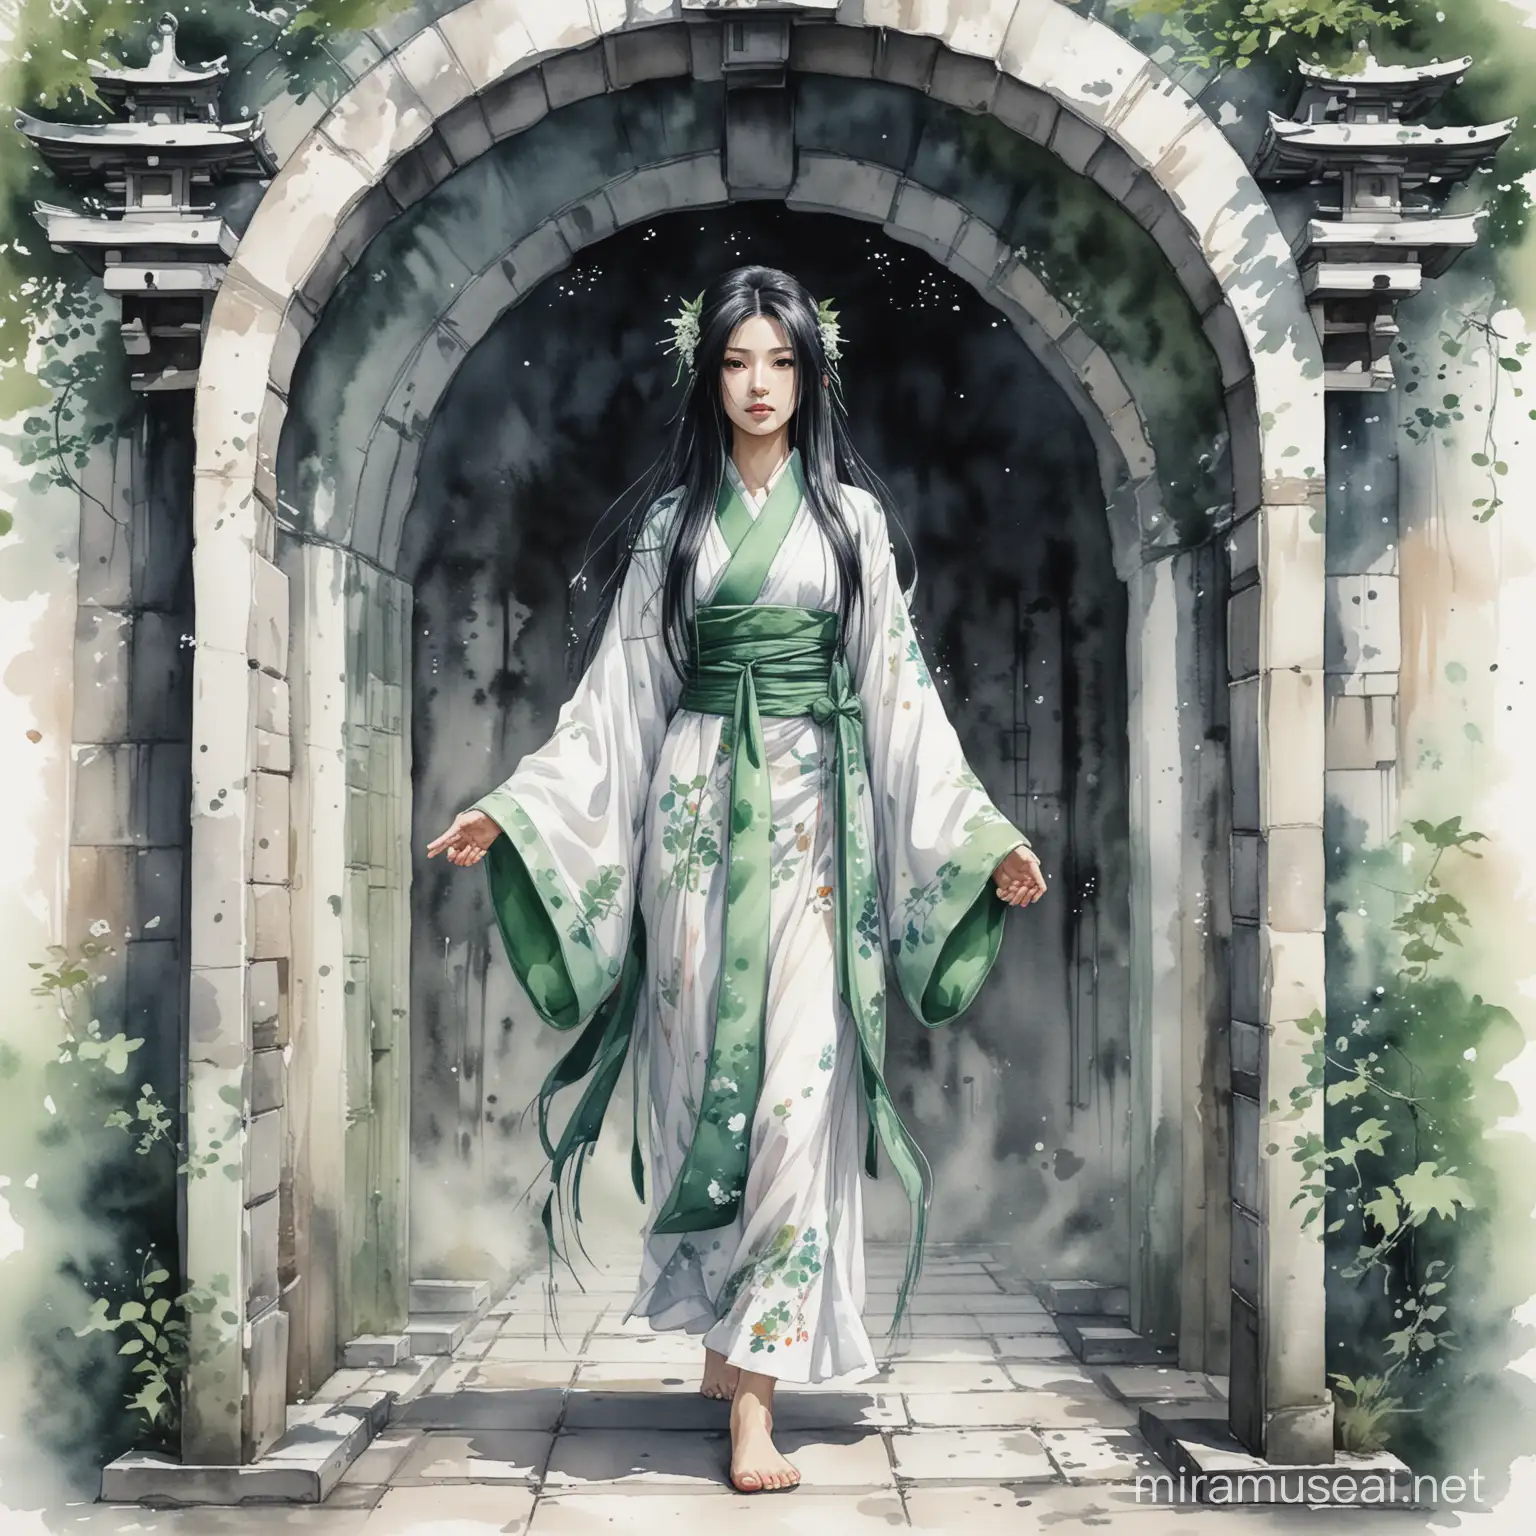 a japanese woman in a shrine maiden robe, white with green trim, long black hair, walking though a magic portal, full body art, sketchy, watercolour style